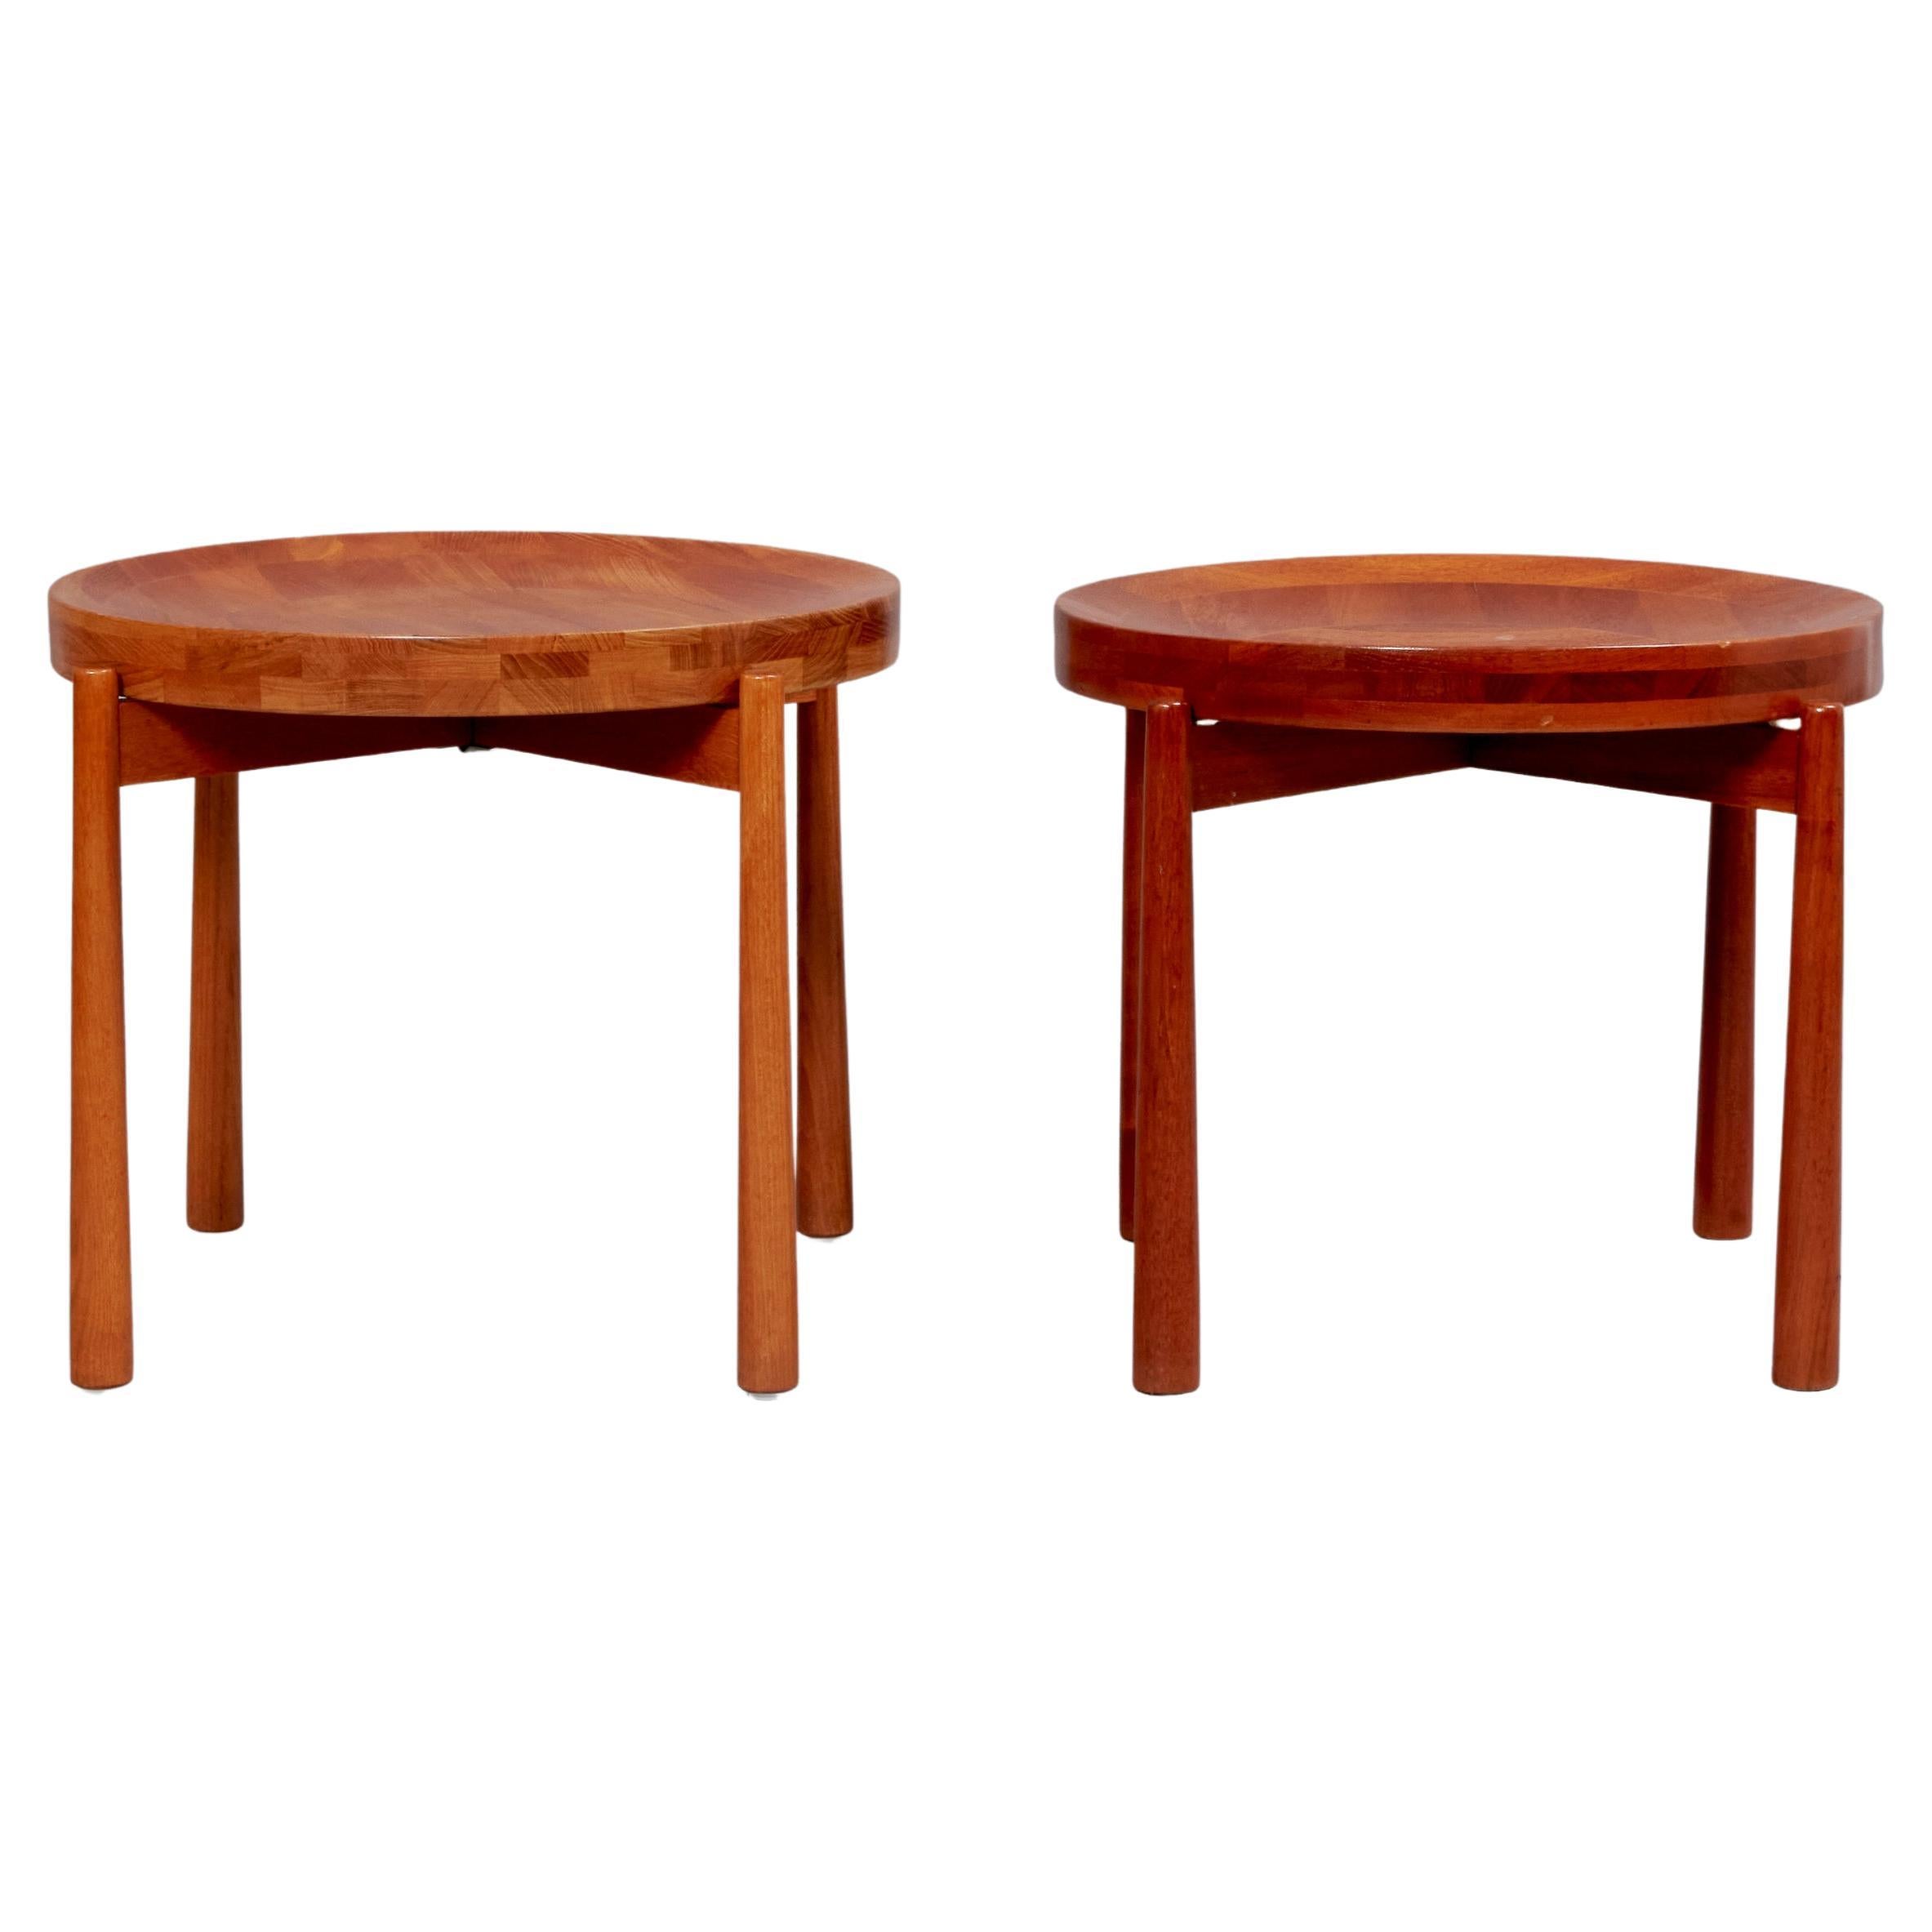 Mid-century modern Jens Quistgaard Teak Wood Side Table and Tray For Sale